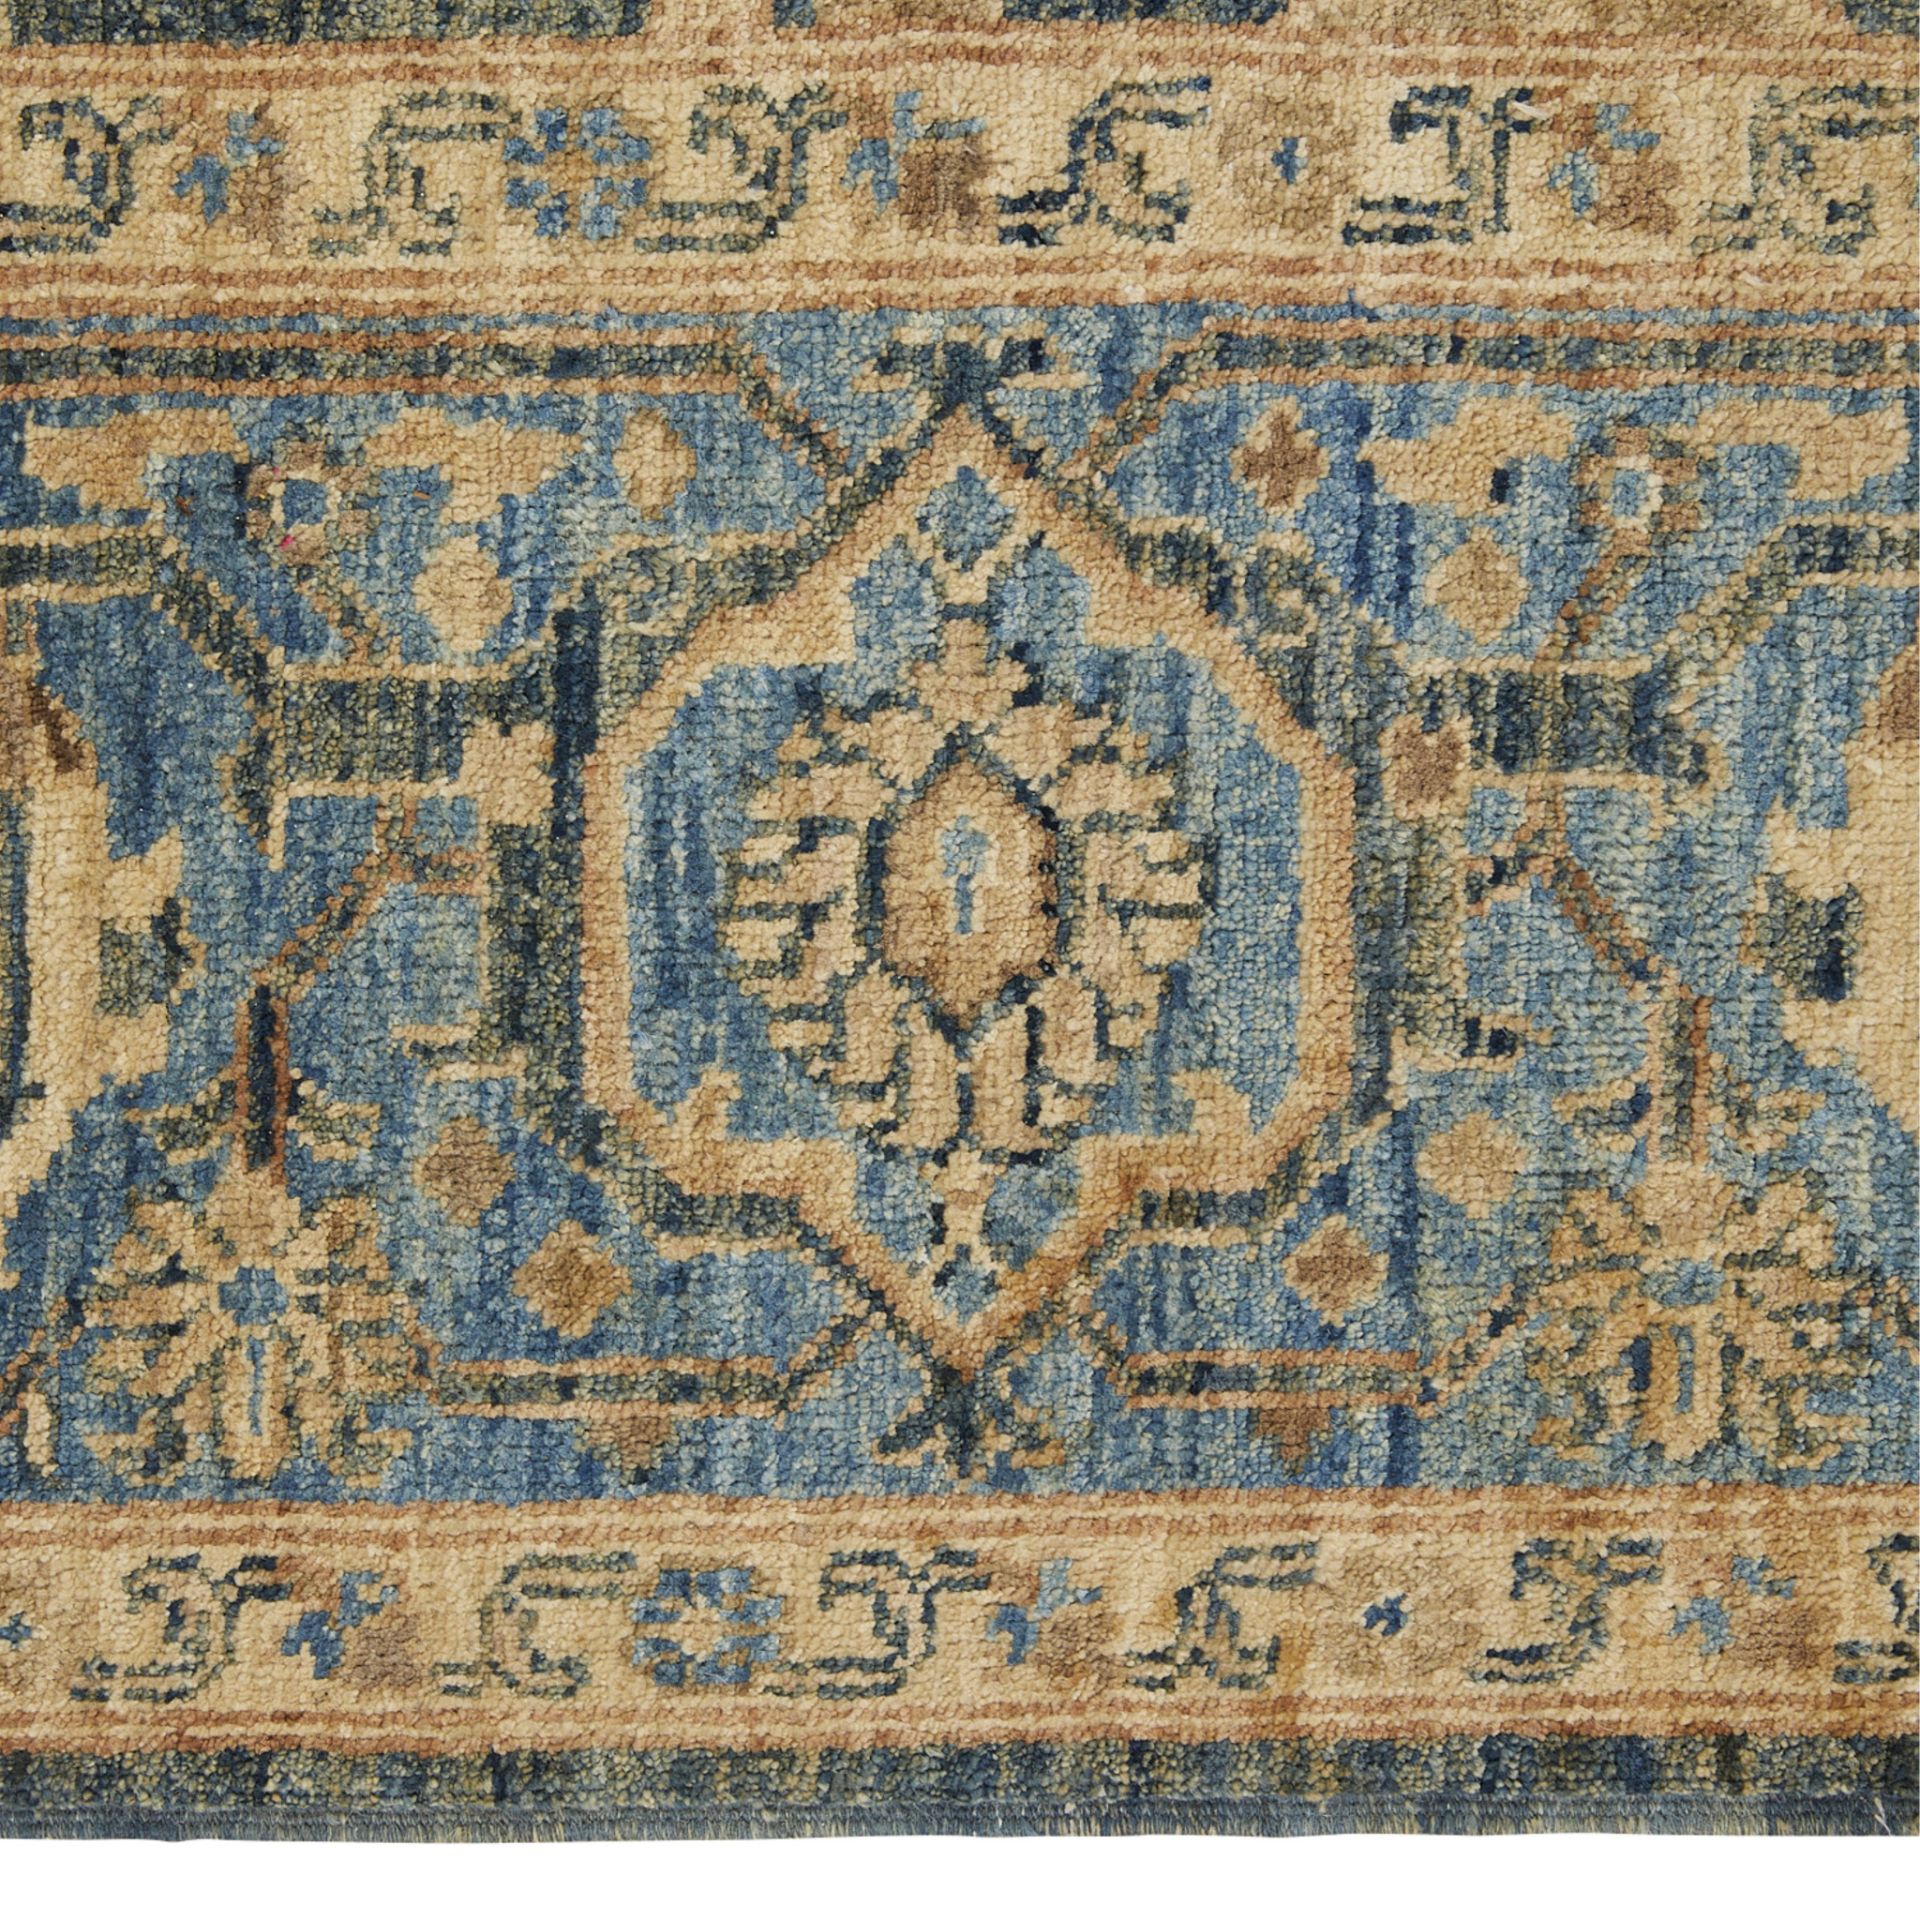 Large Persian Blue & White Floral Rug 10' x 8' - Image 5 of 6